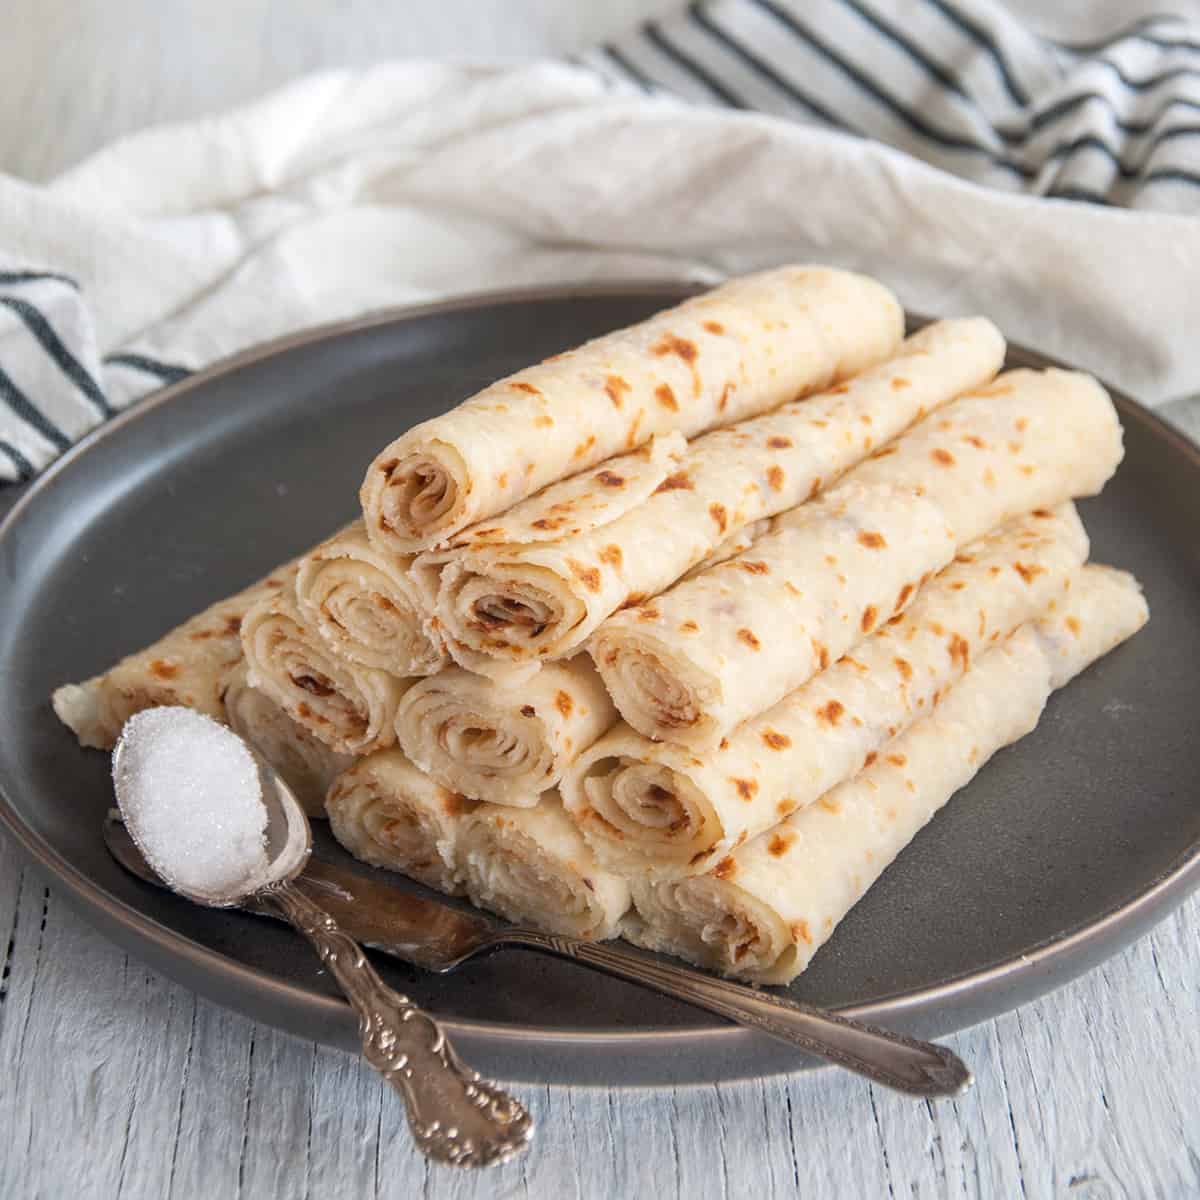 Pile of lefse from this lefse recipe on a dark plate with a knife and a spoonful of sugar.